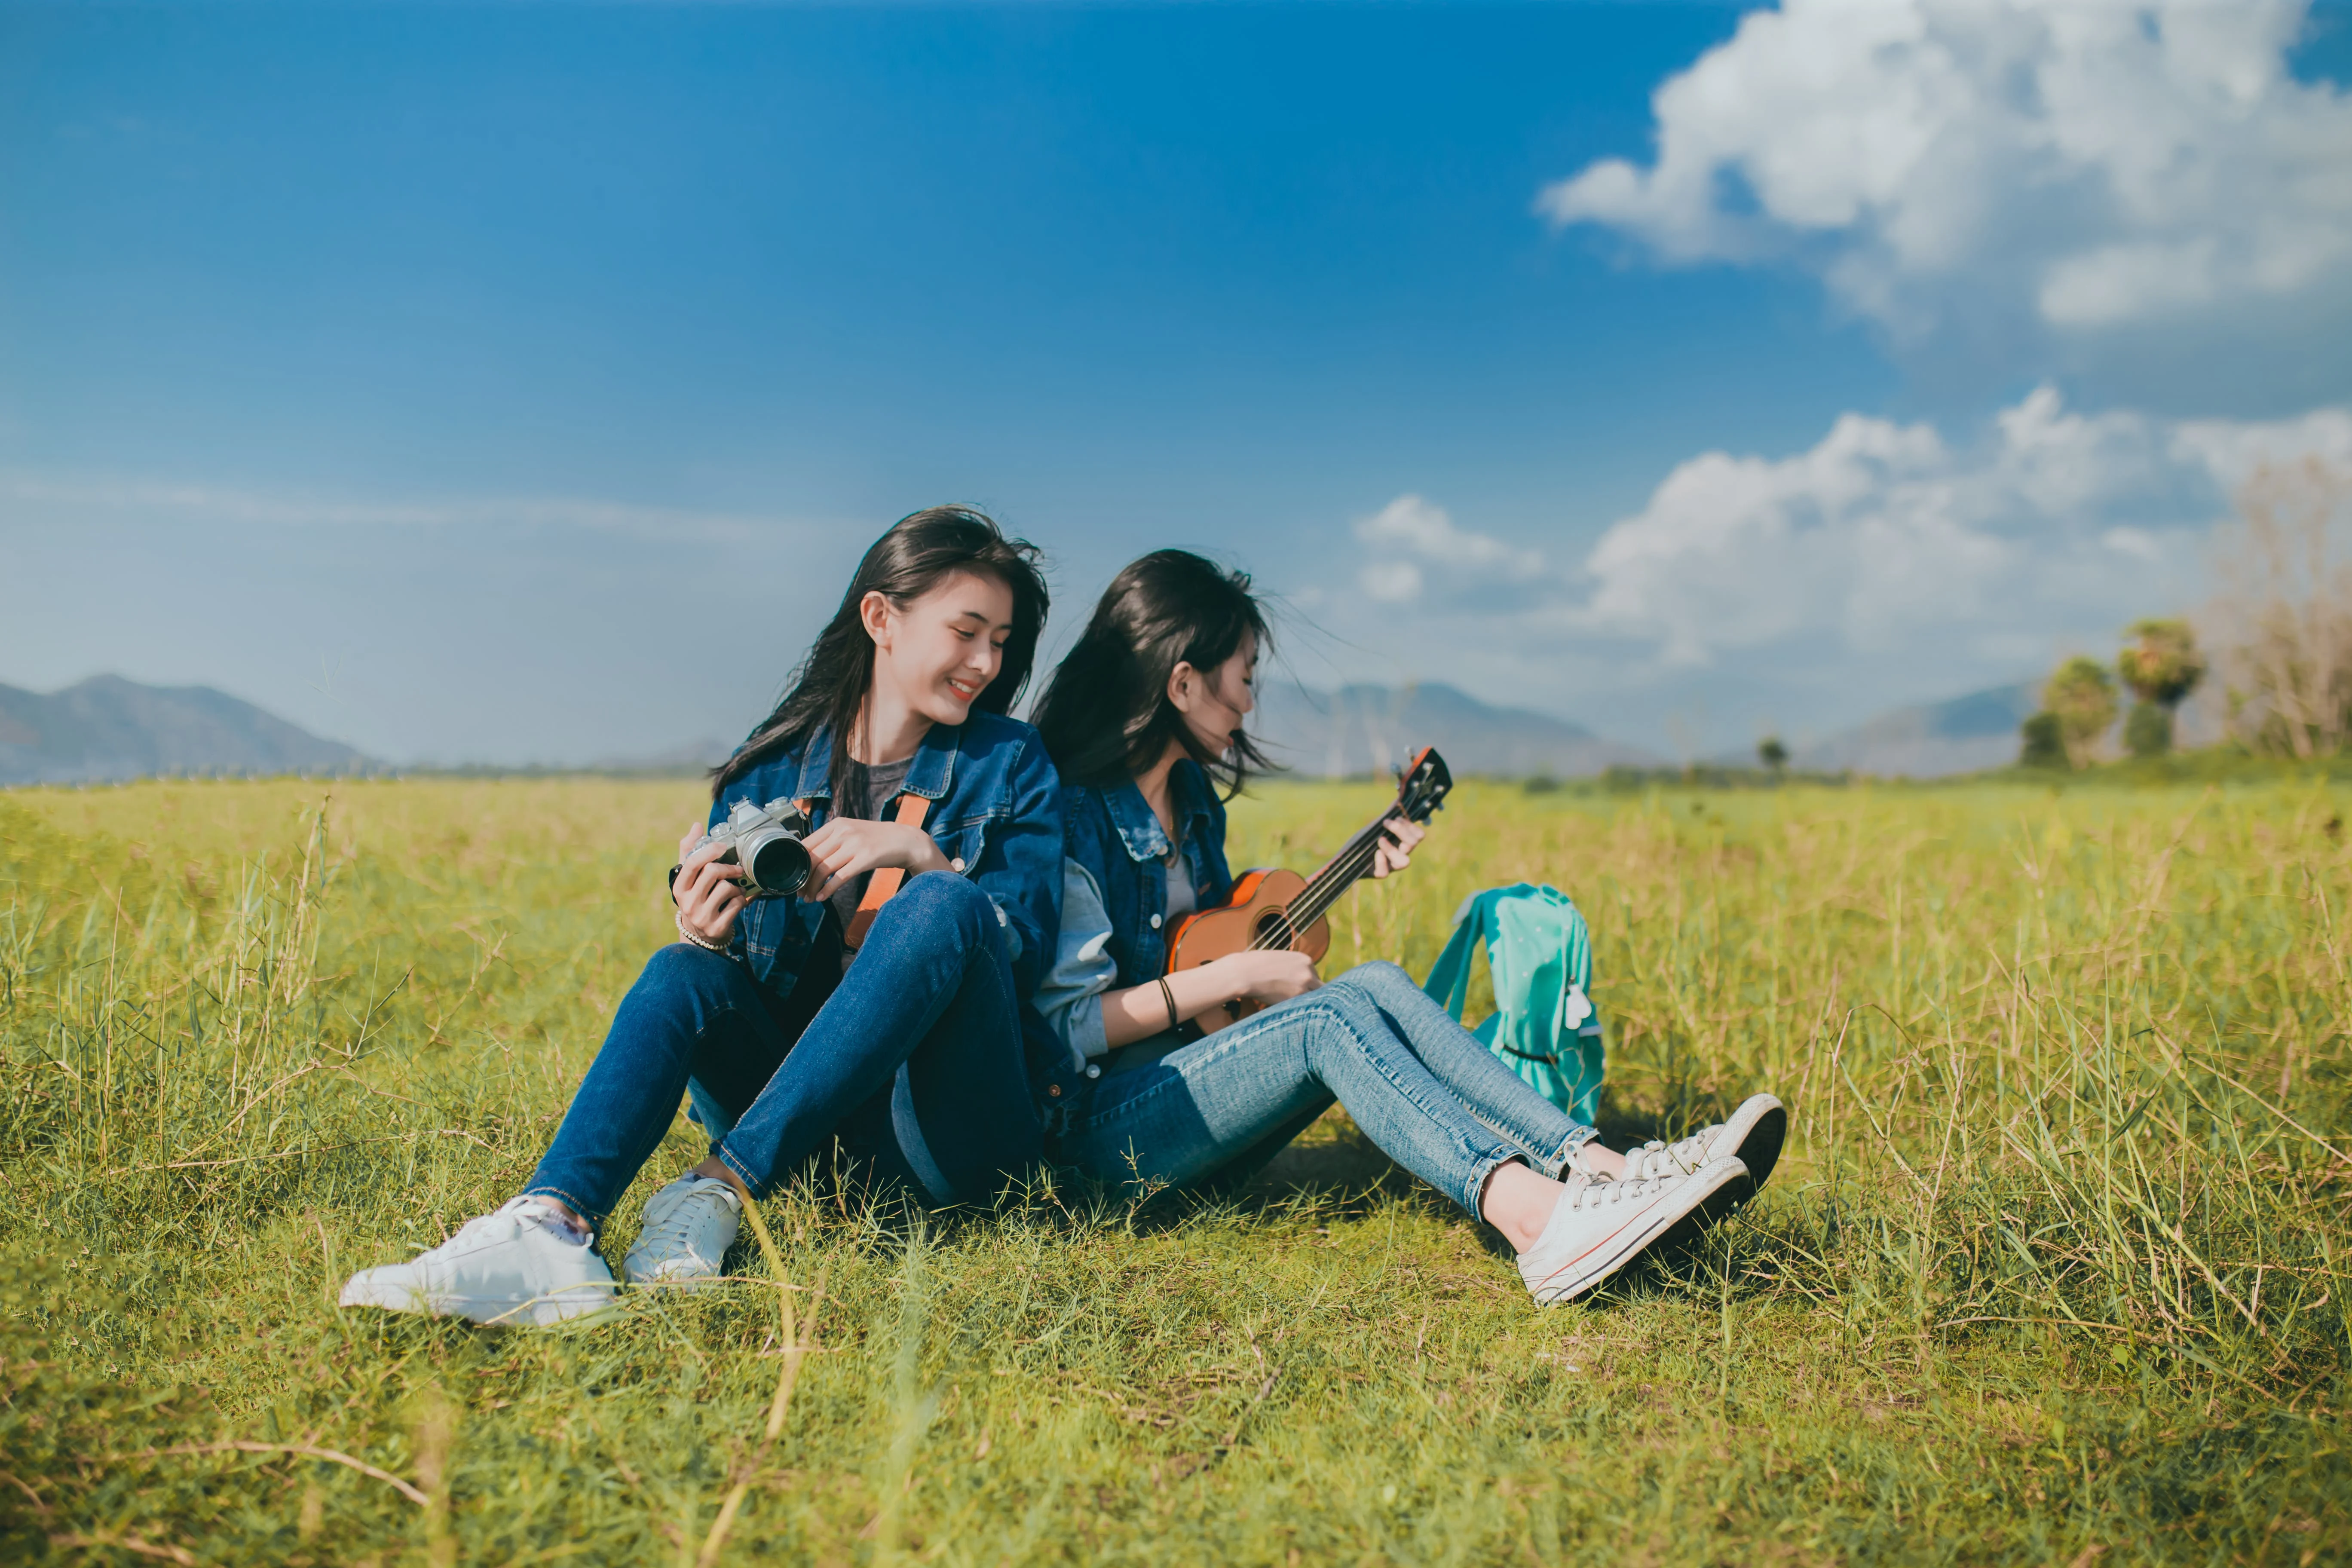 Two girls sitting in a field and playing a guitar